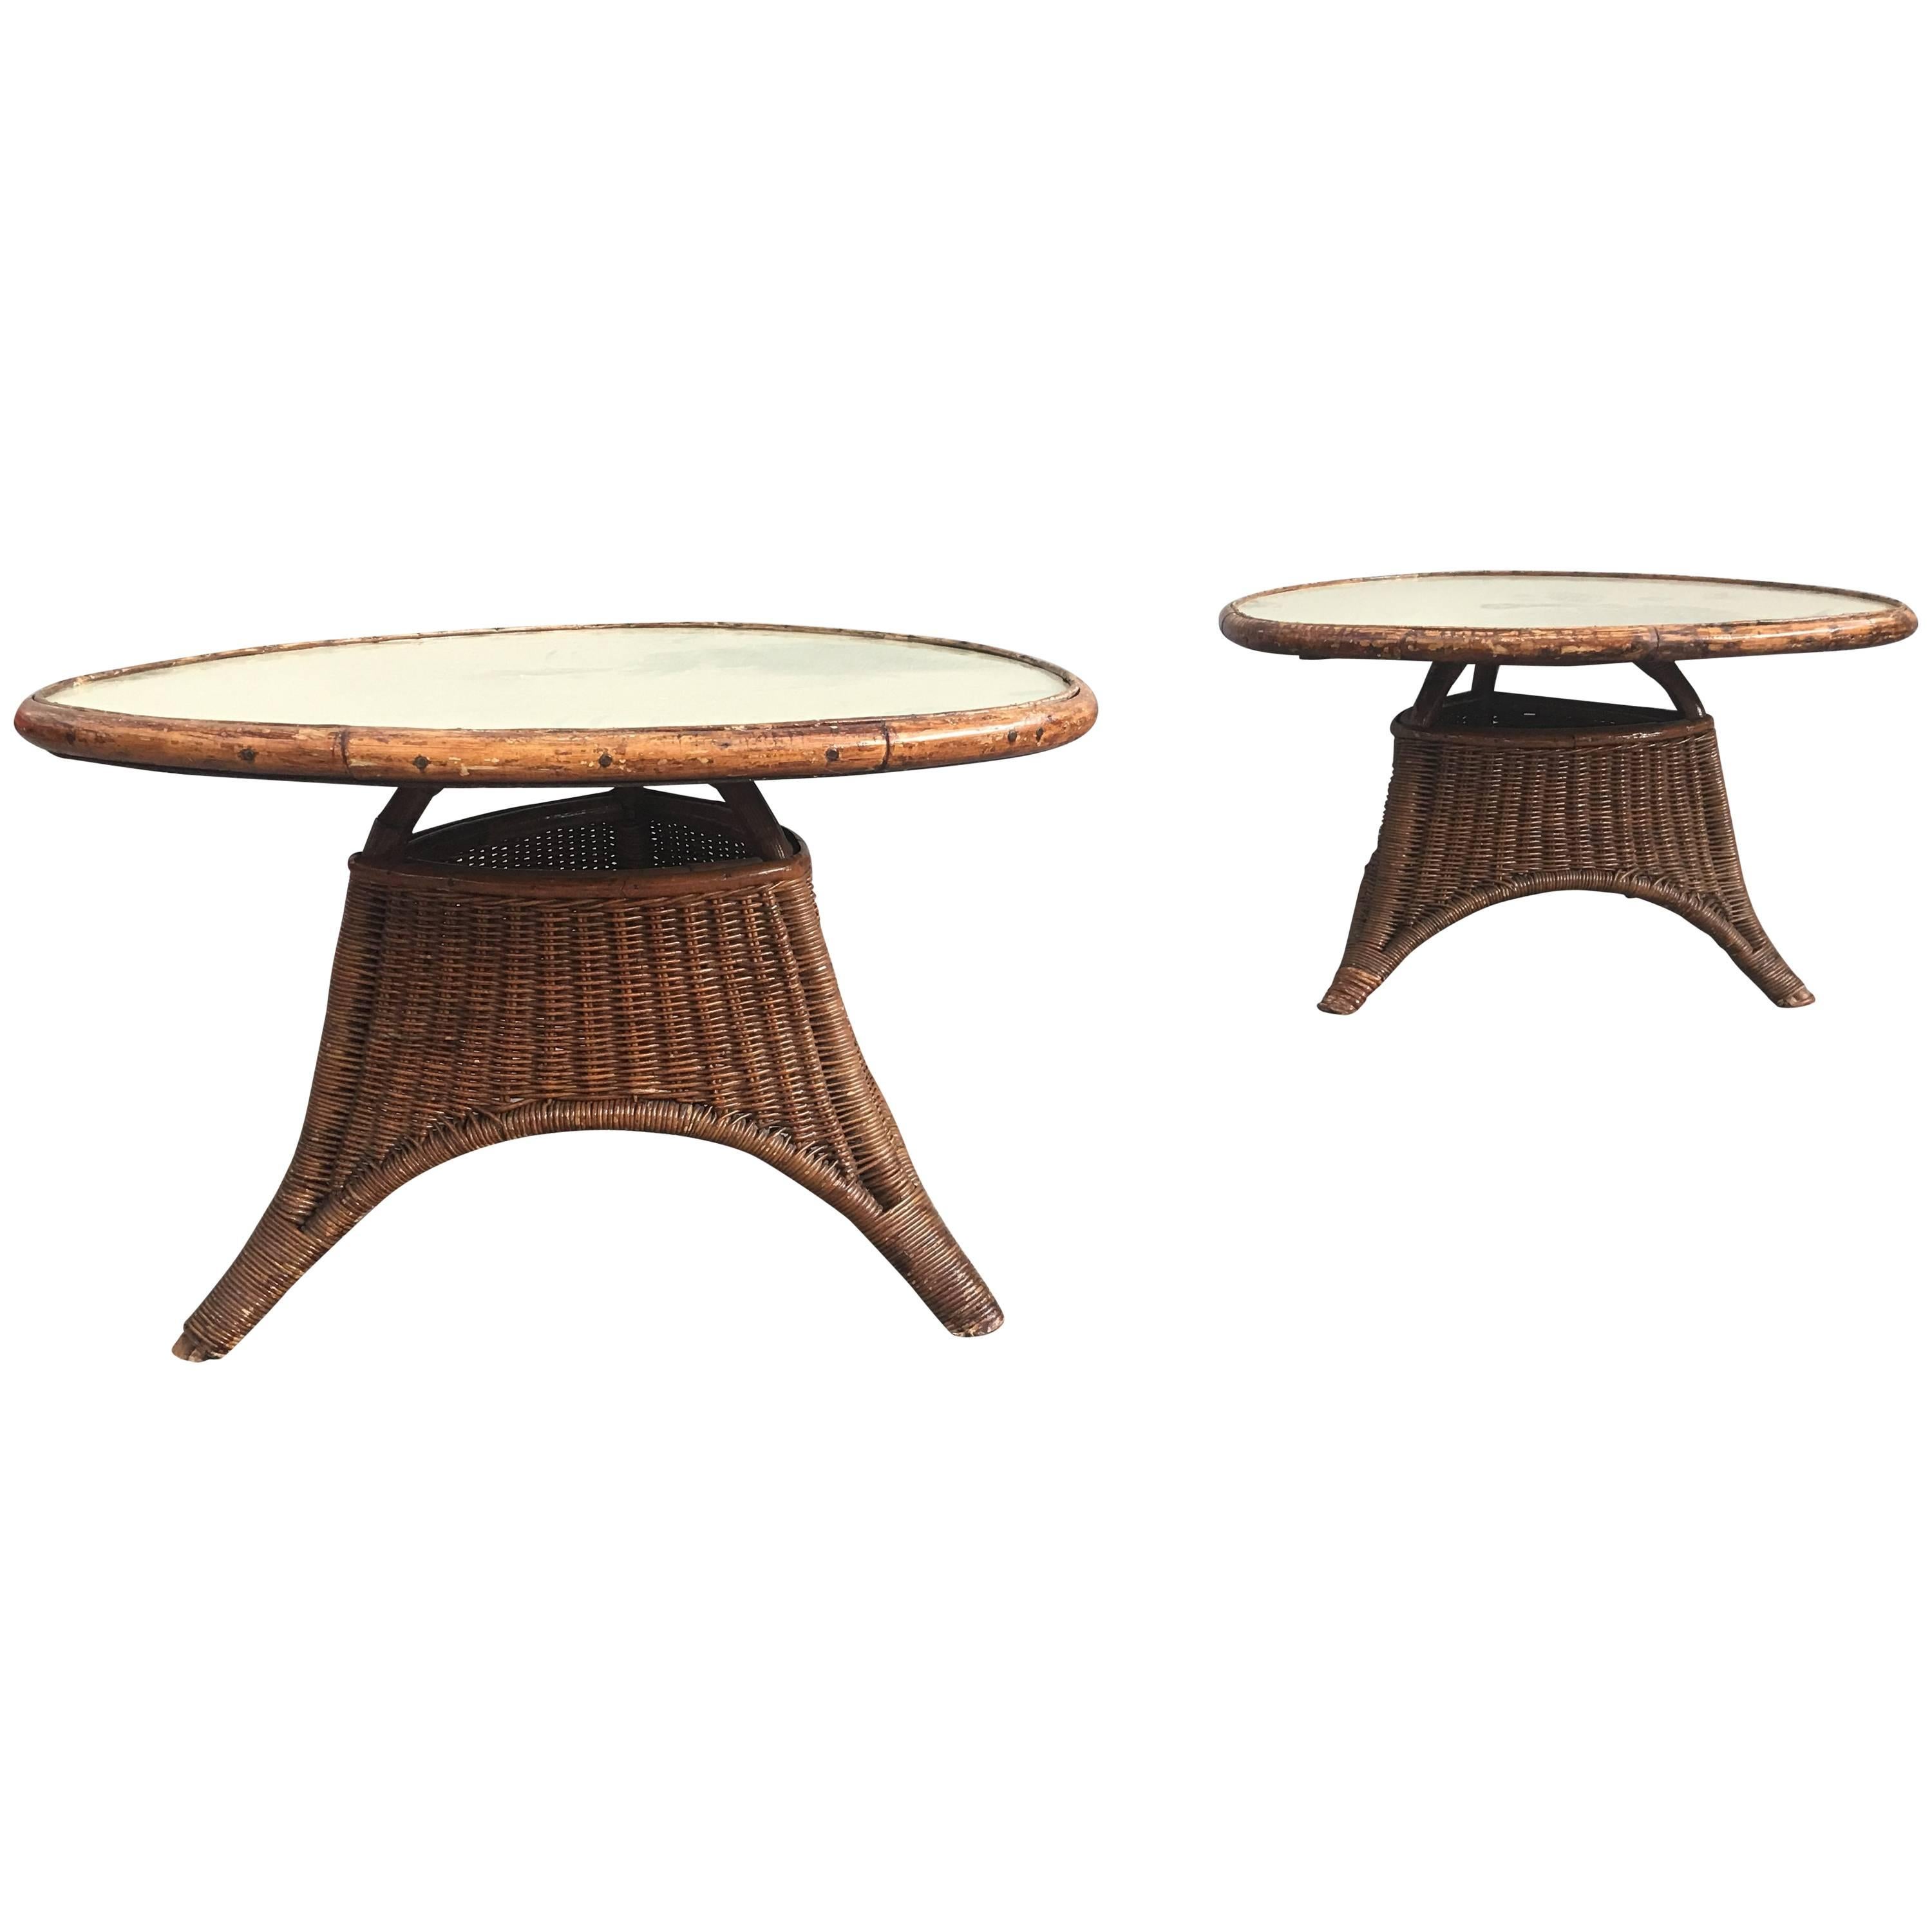 Charming Pair of Wicker Coffee Tables